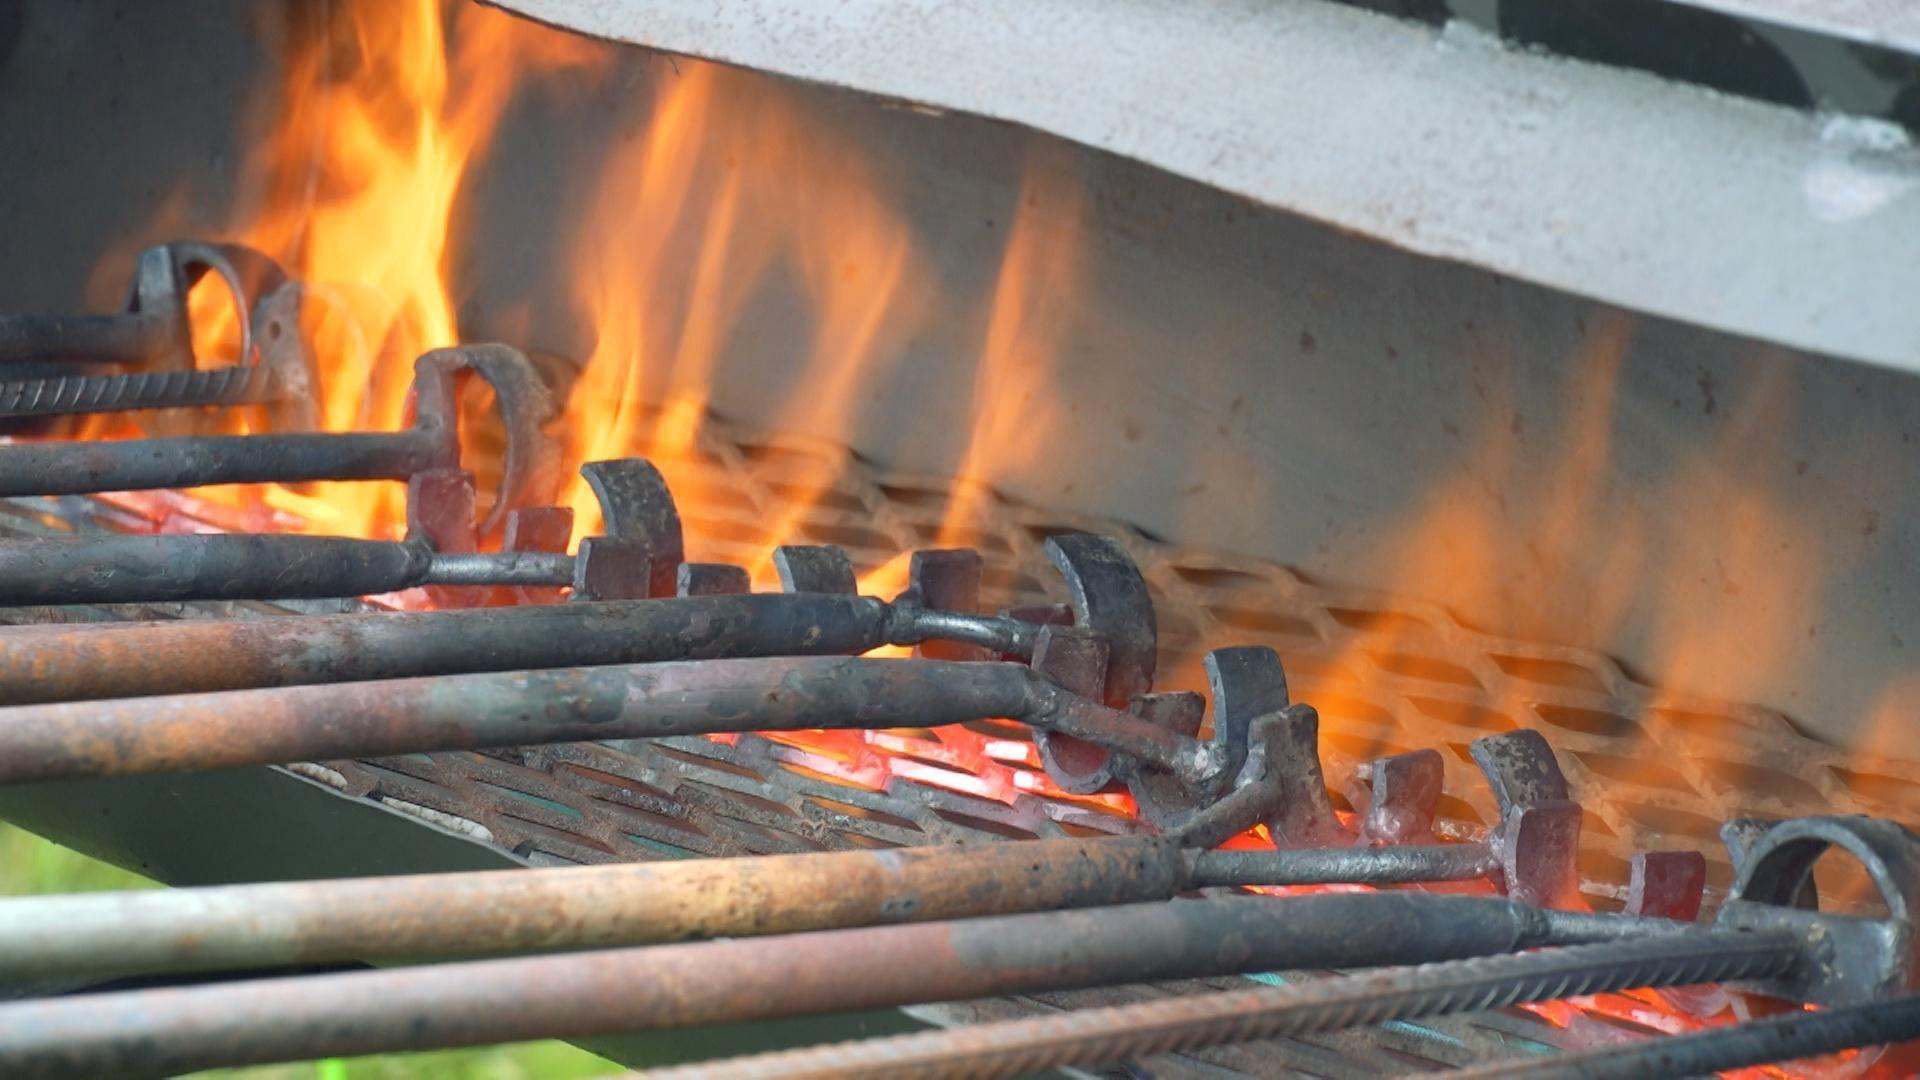 Ten cow branding irons are sitting on a fire. 